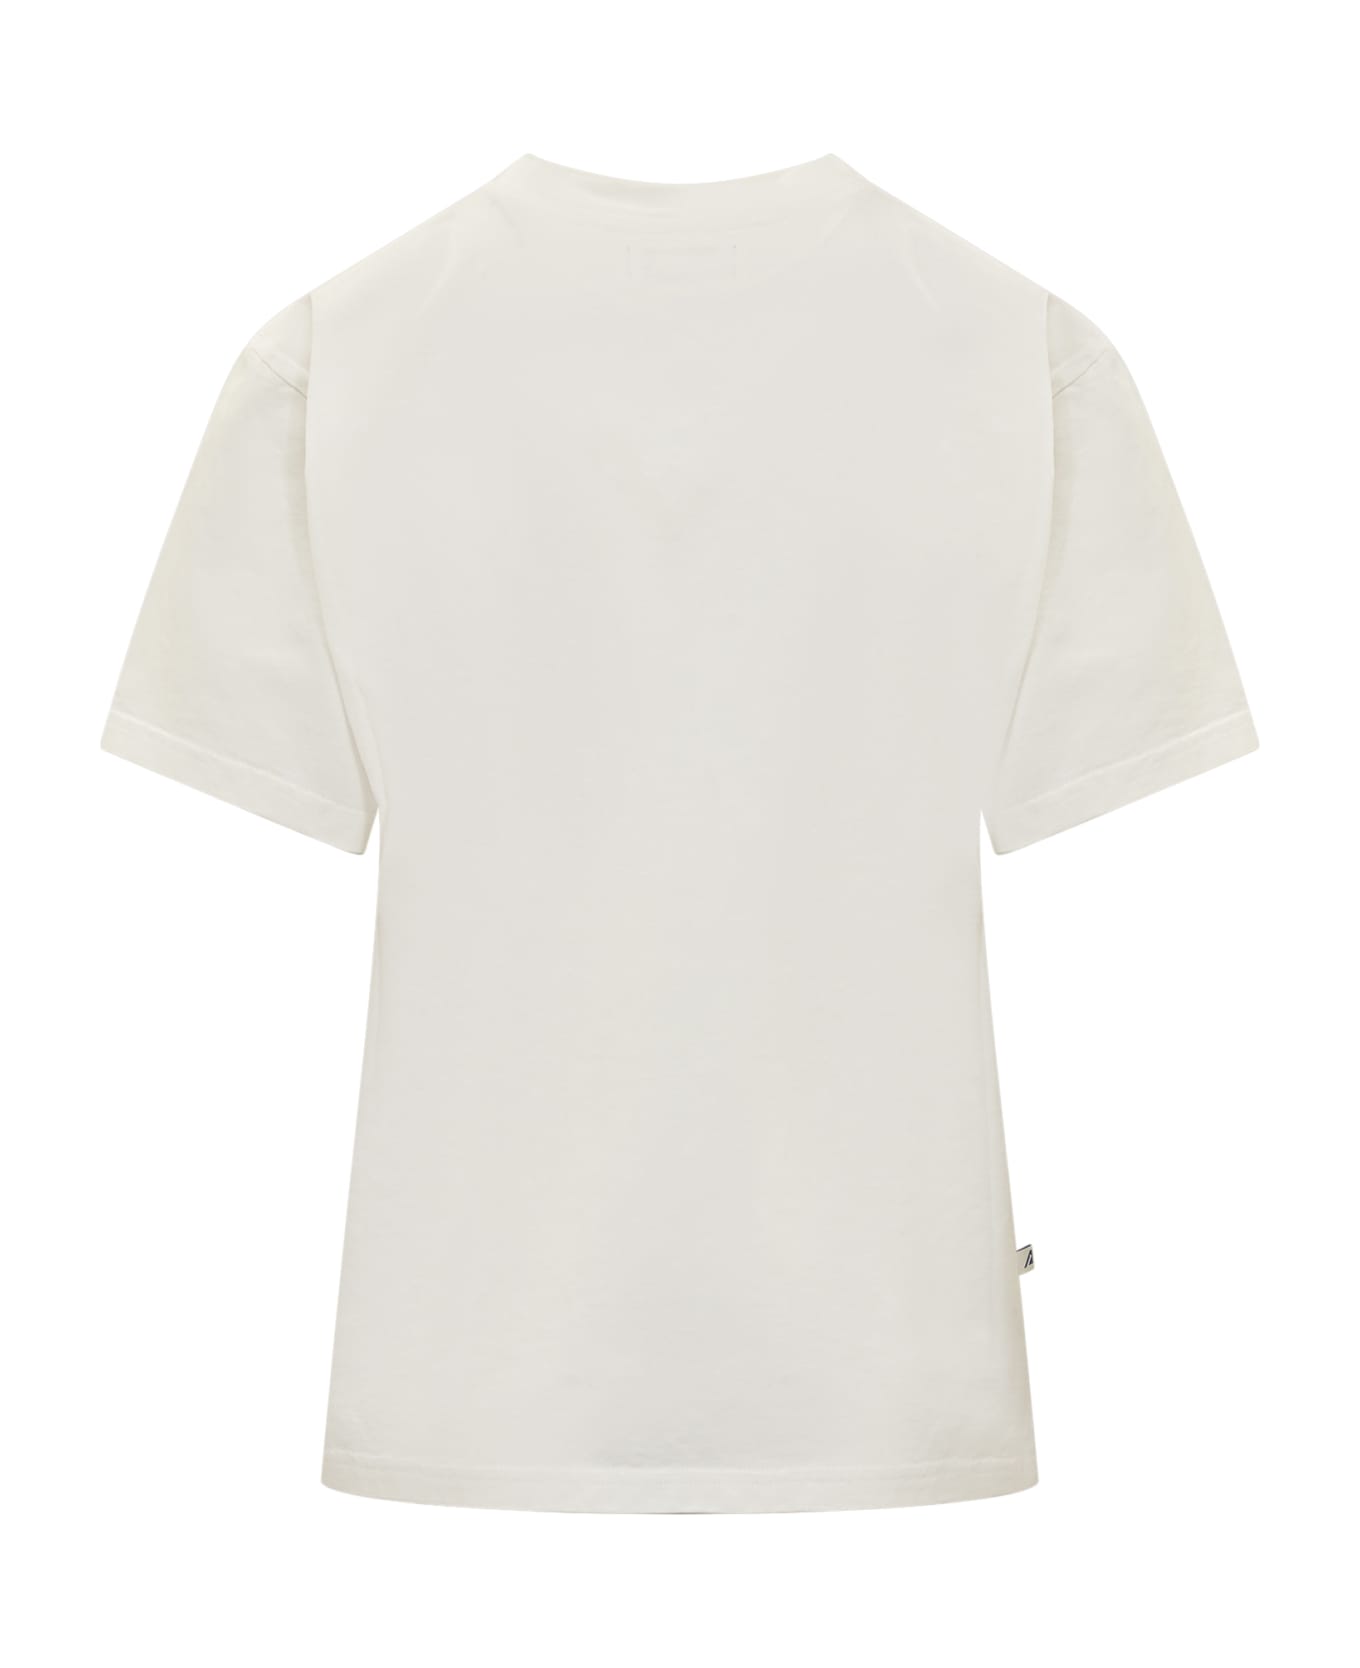 Autry T-shirt With Logo - White